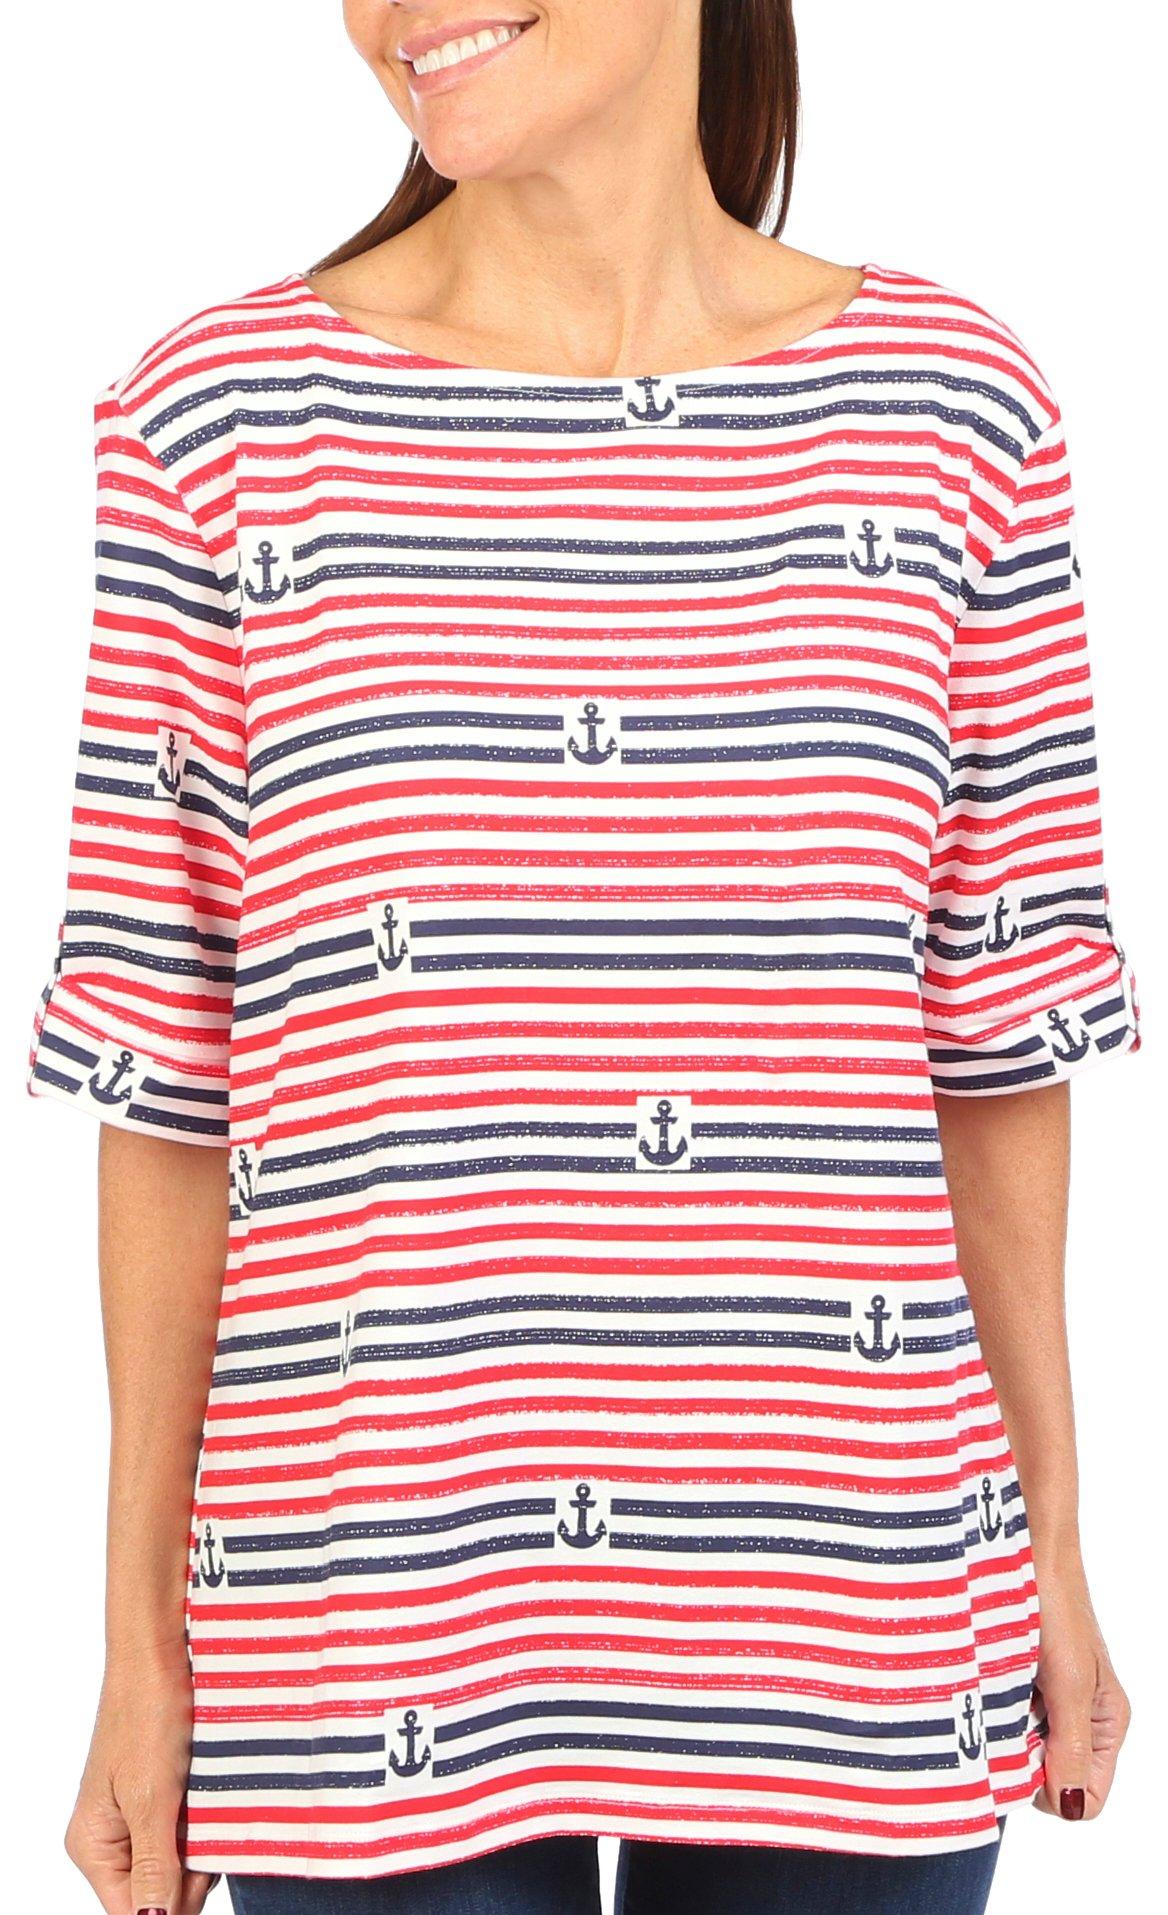 Coral Bay Petite Striped Anchor Print Short Sleeve Top